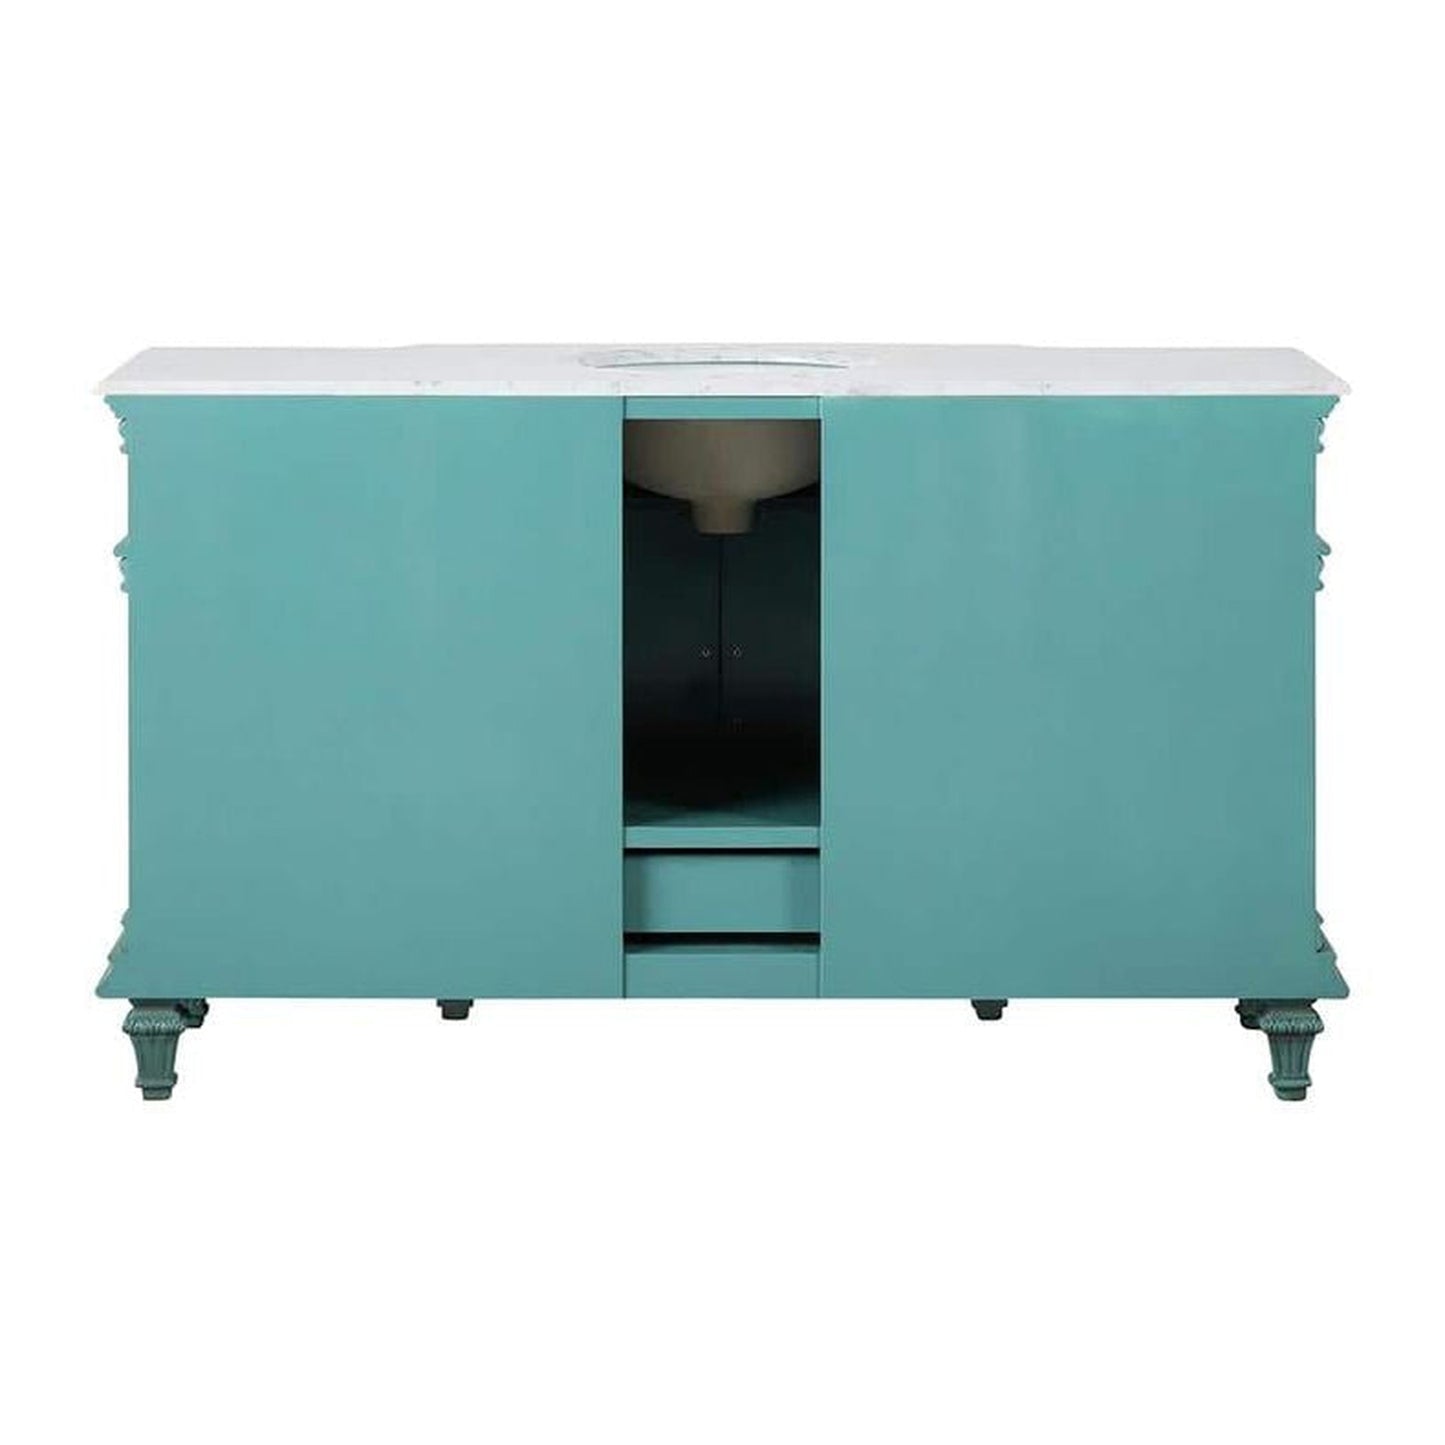 Silkroad Exclusive 60" Single Sink Retro Green Bathroom Vanity With Carrara White Marble Countertop and White Ceramic Undermount Sink